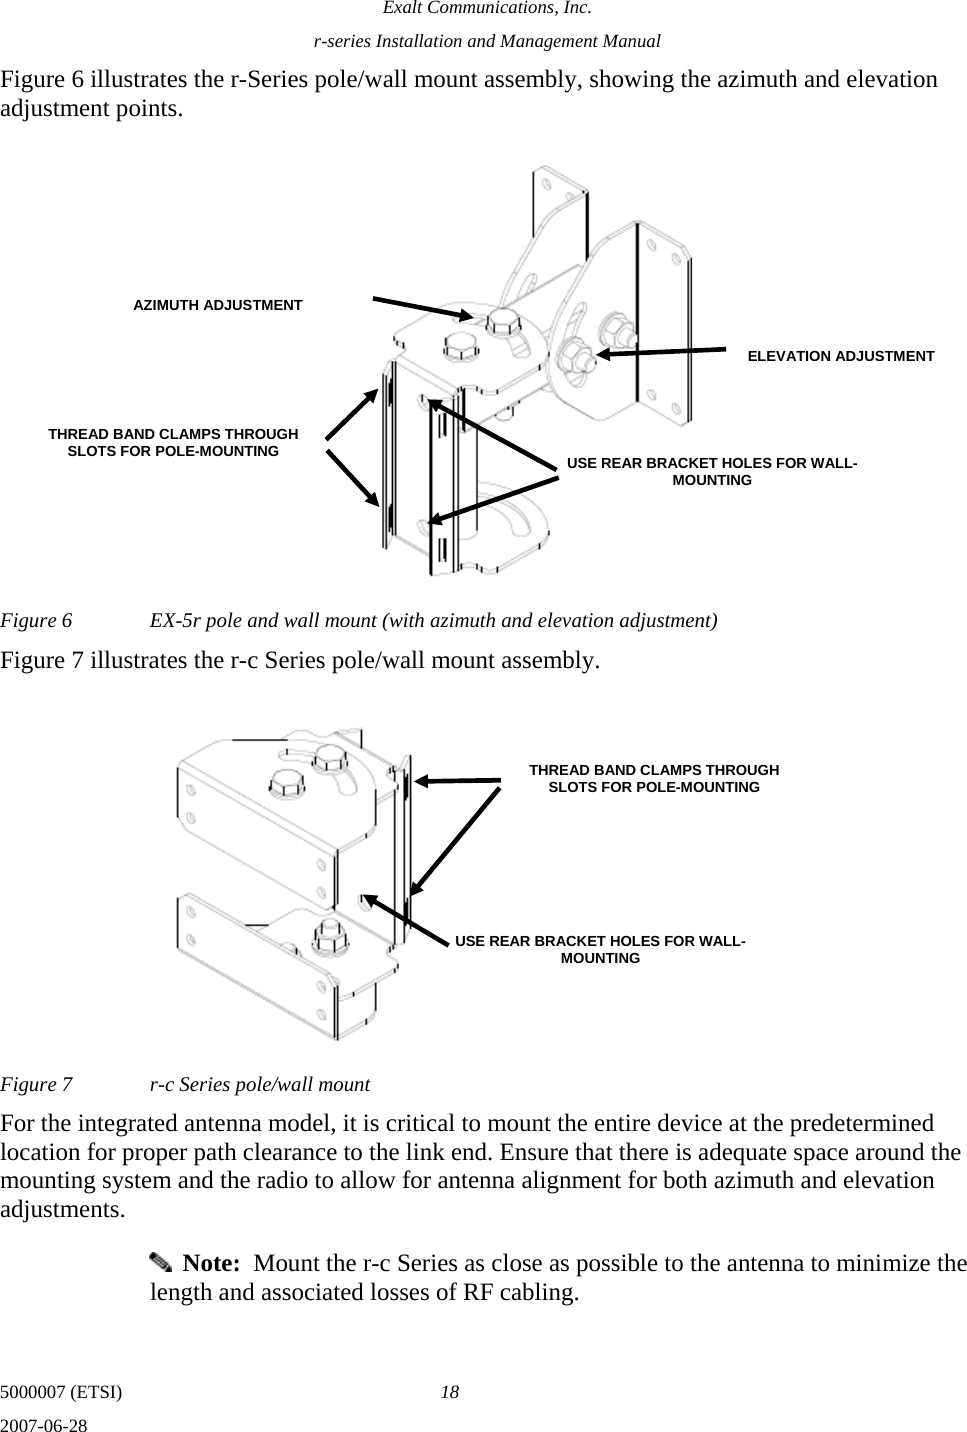 Exalt Communications, Inc. r-series Installation and Management Manual 5000007 (ETSI)  18 2007-06-28  Figure 6 illustrates the r-Series pole/wall mount assembly, showing the azimuth and elevation adjustment points. Figure 6  EX-5r pole and wall mount (with azimuth and elevation adjustment) Figure 7 illustrates the r-c Series pole/wall mount assembly. Figure 7  r-c Series pole/wall mount For the integrated antenna model, it is critical to mount the entire device at the predetermined location for proper path clearance to the link end. Ensure that there is adequate space around the mounting system and the radio to allow for antenna alignment for both azimuth and elevation adjustments.   Note:  Mount the r-c Series as close as possible to the antenna to minimize the length and associated losses of RF cabling. THREAD BAND CLAMPS THROUGH SLOTS FOR POLE-MOUNTING  USE REAR BRACKET HOLES FOR WALL-MOUNTING AZIMUTH ADJUSTMENTELEVATION ADJUSTMENTUSE REAR BRACKET HOLES FOR WALL-MOUNTING THREAD BAND CLAMPS THROUGH SLOTS FOR POLE-MOUNTING 